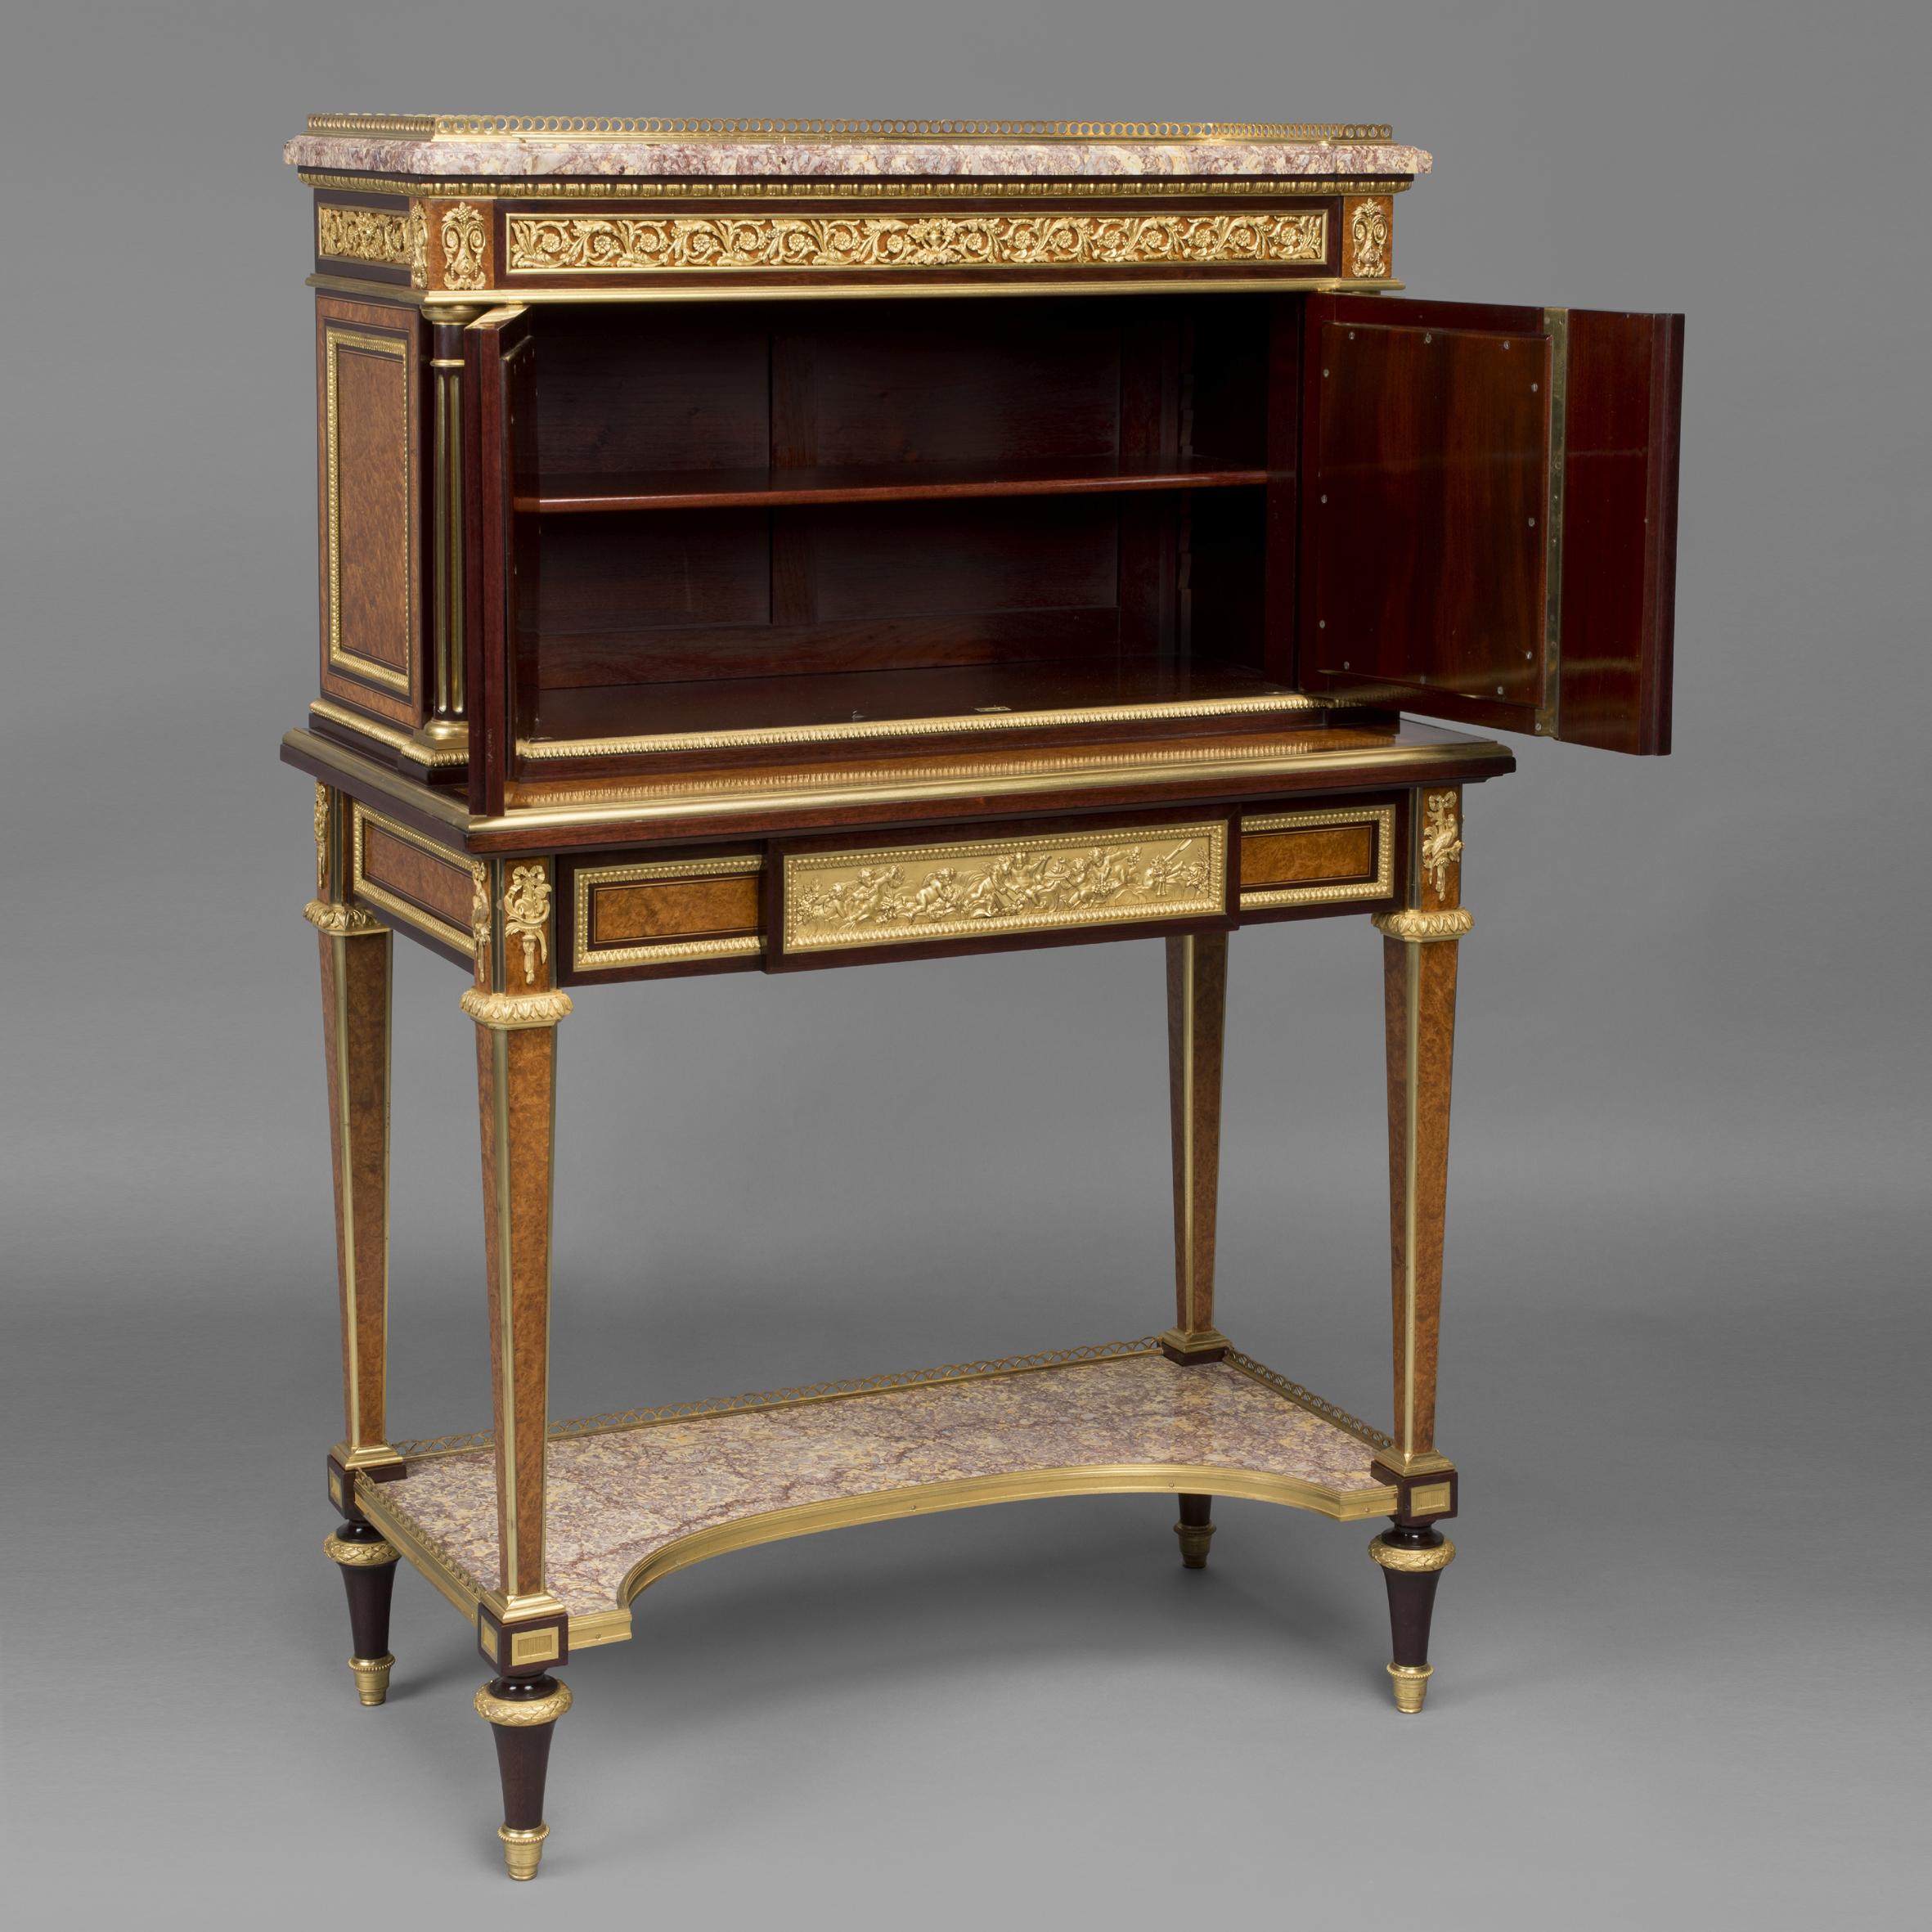 Ormolu Pair of Bonheur Du Jours With Lacquer Panels, by Henry Dasson For Sale